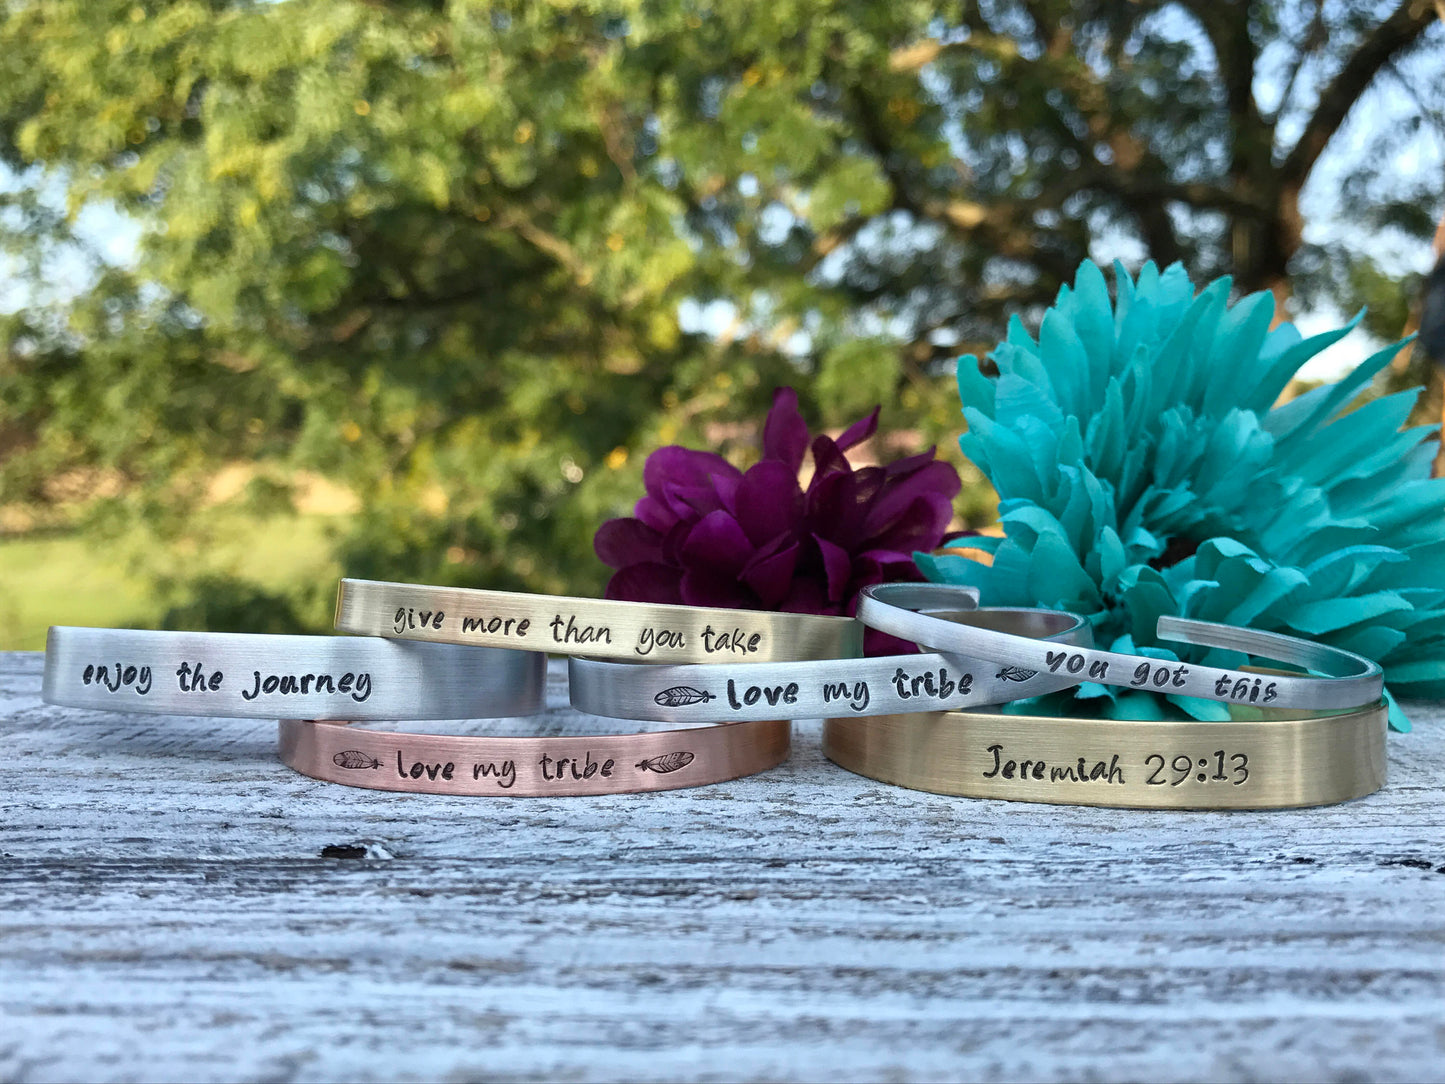 With brave wings she flies-hand stamped skinny silver mantra cuff bracelet-strong woman-motivational jewelry-friend gift-christmas gift